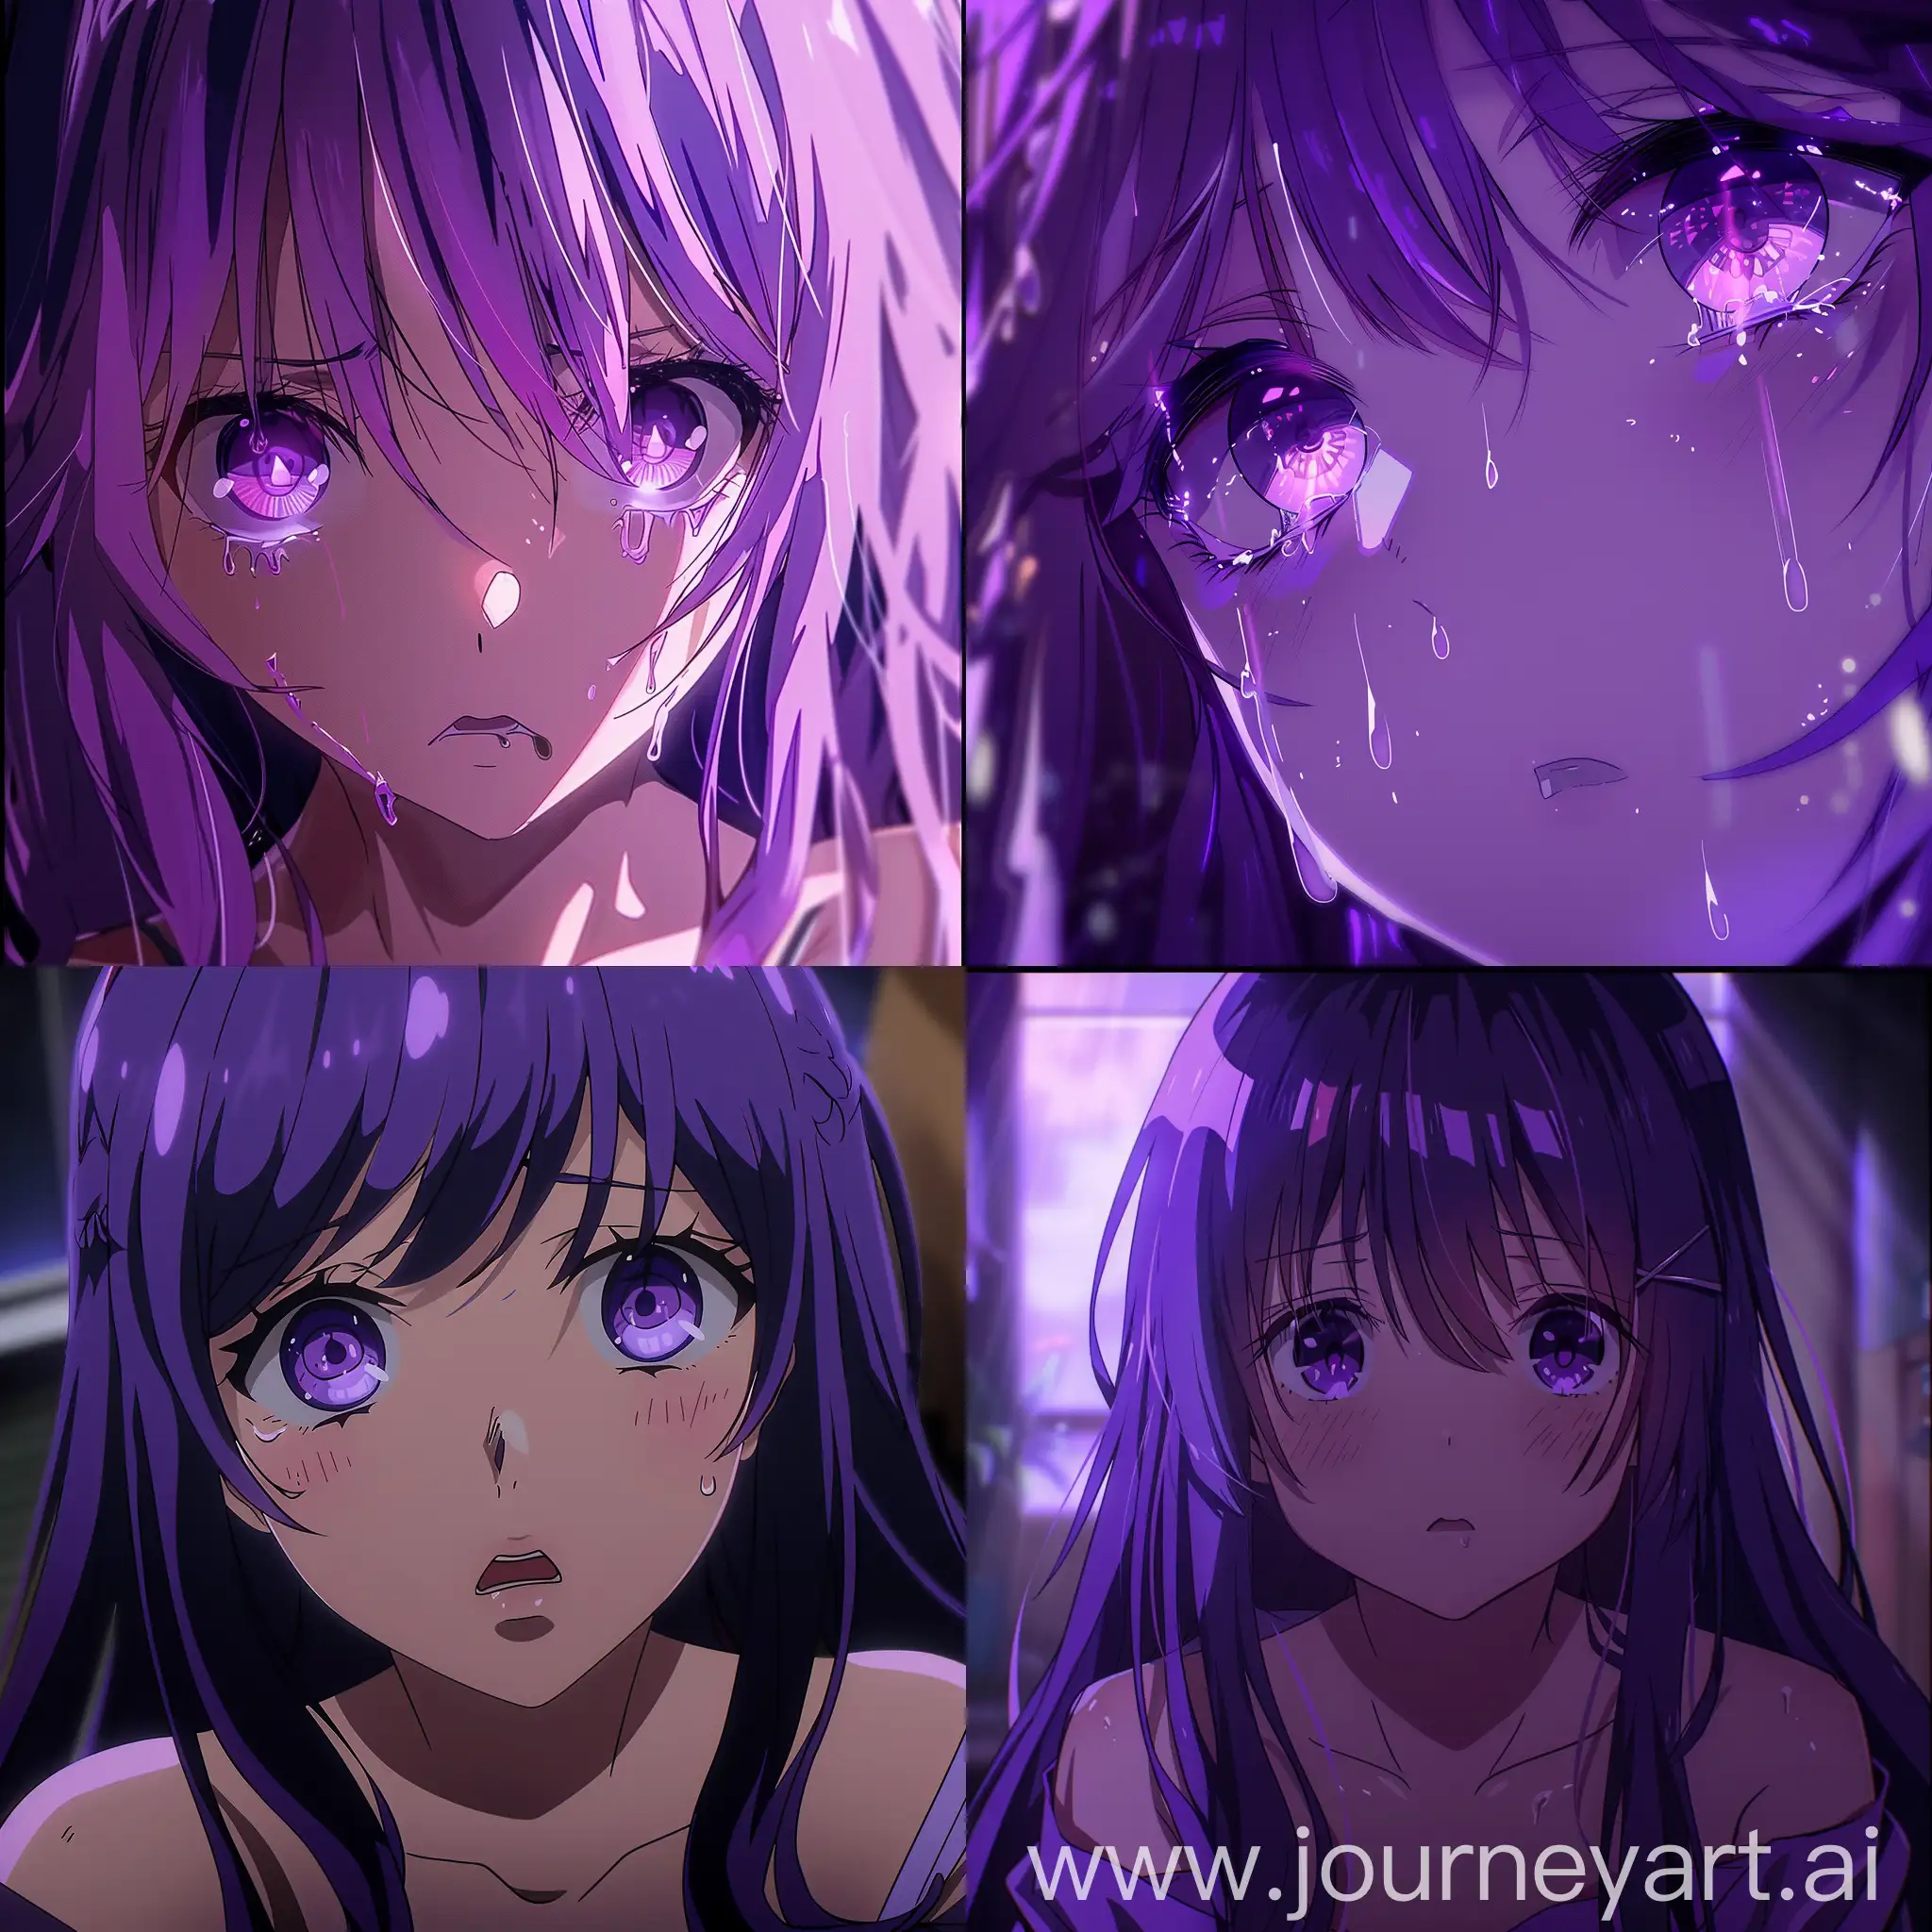 Anime-Character-Kokushiva-Cold-Stare-and-Inner-Sadness-in-a-Beautiful-Purple-Setting